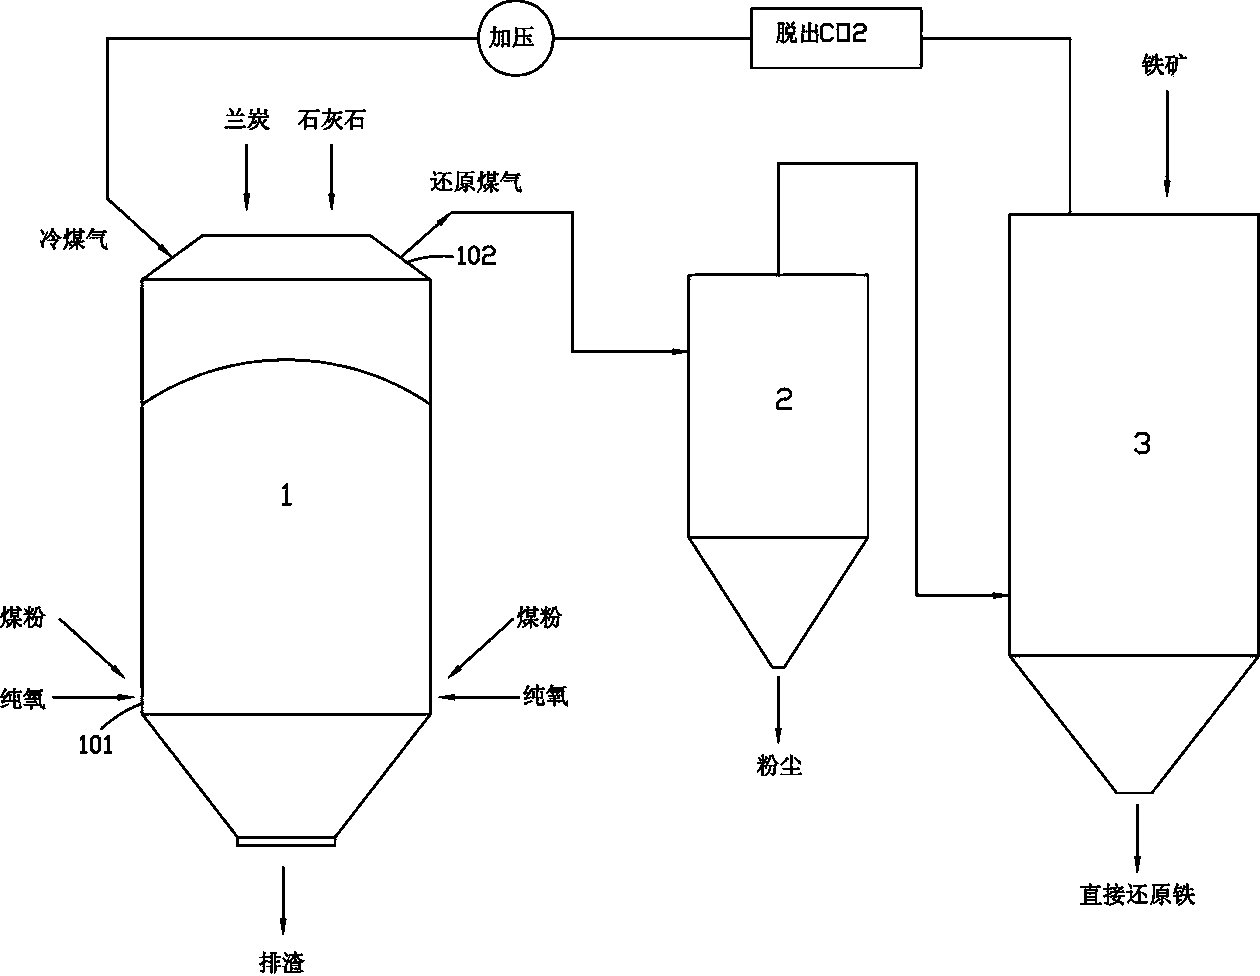 Process for producing direct reduced iron (DRI) by carrying out pure oxygen gasification on semicoke